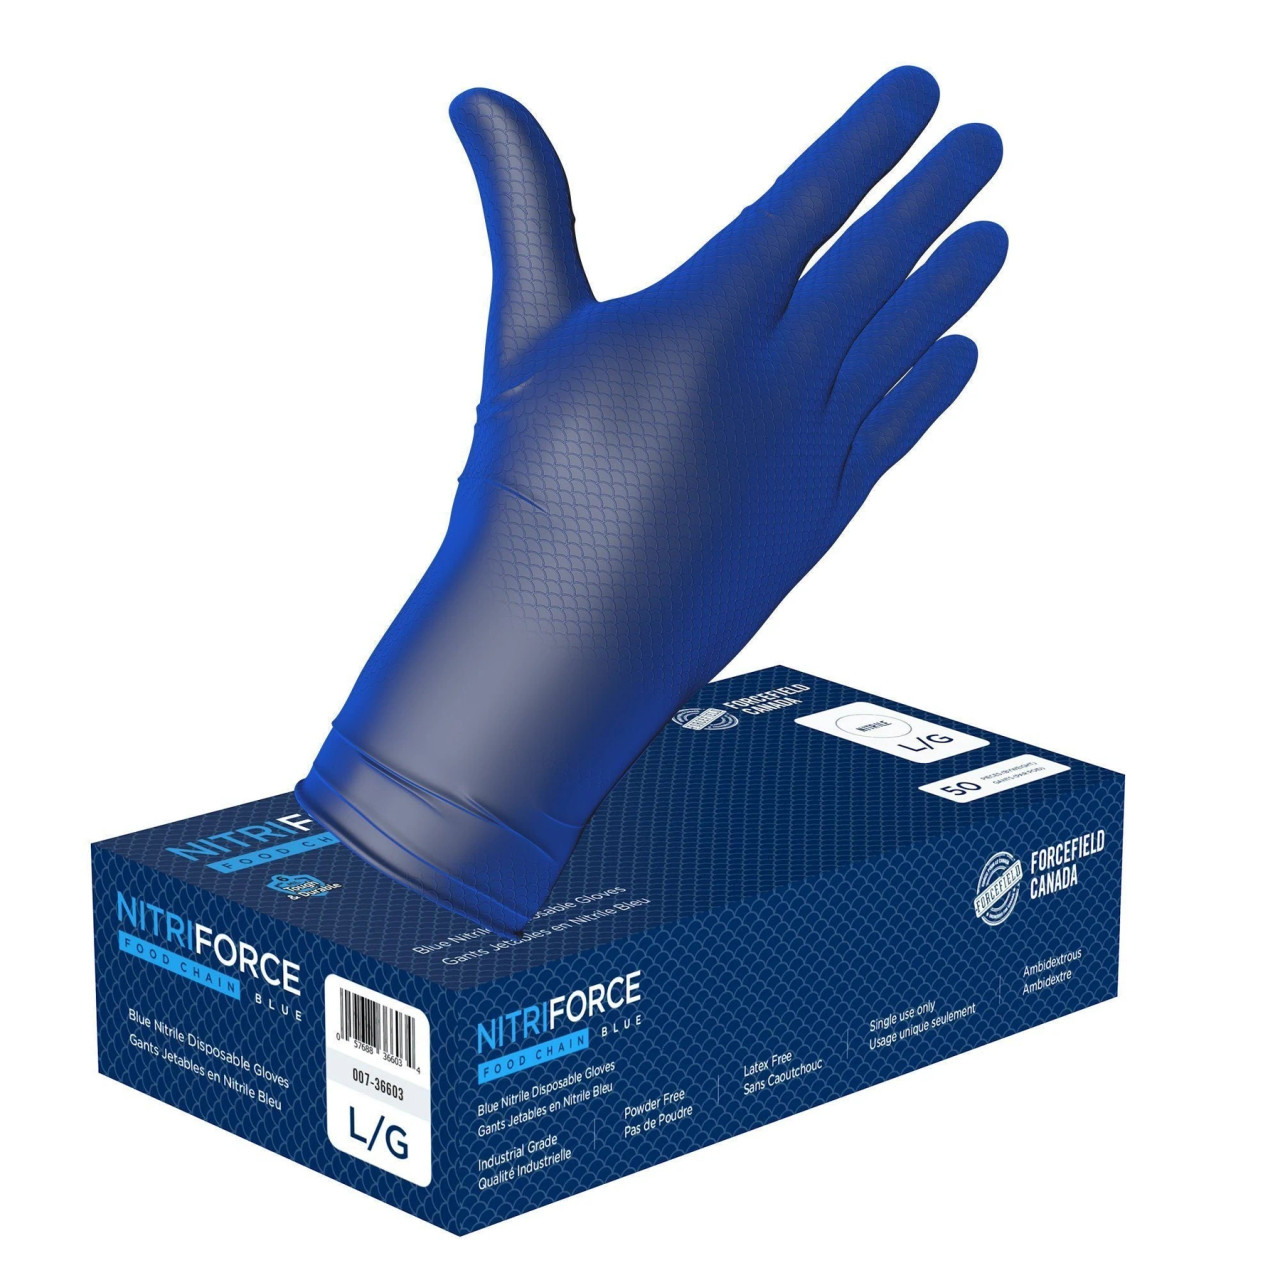 NitriForce 007-36603 Foodchain Textured Nitrile Disposable Gloves Large (Case of 500 Gloves)